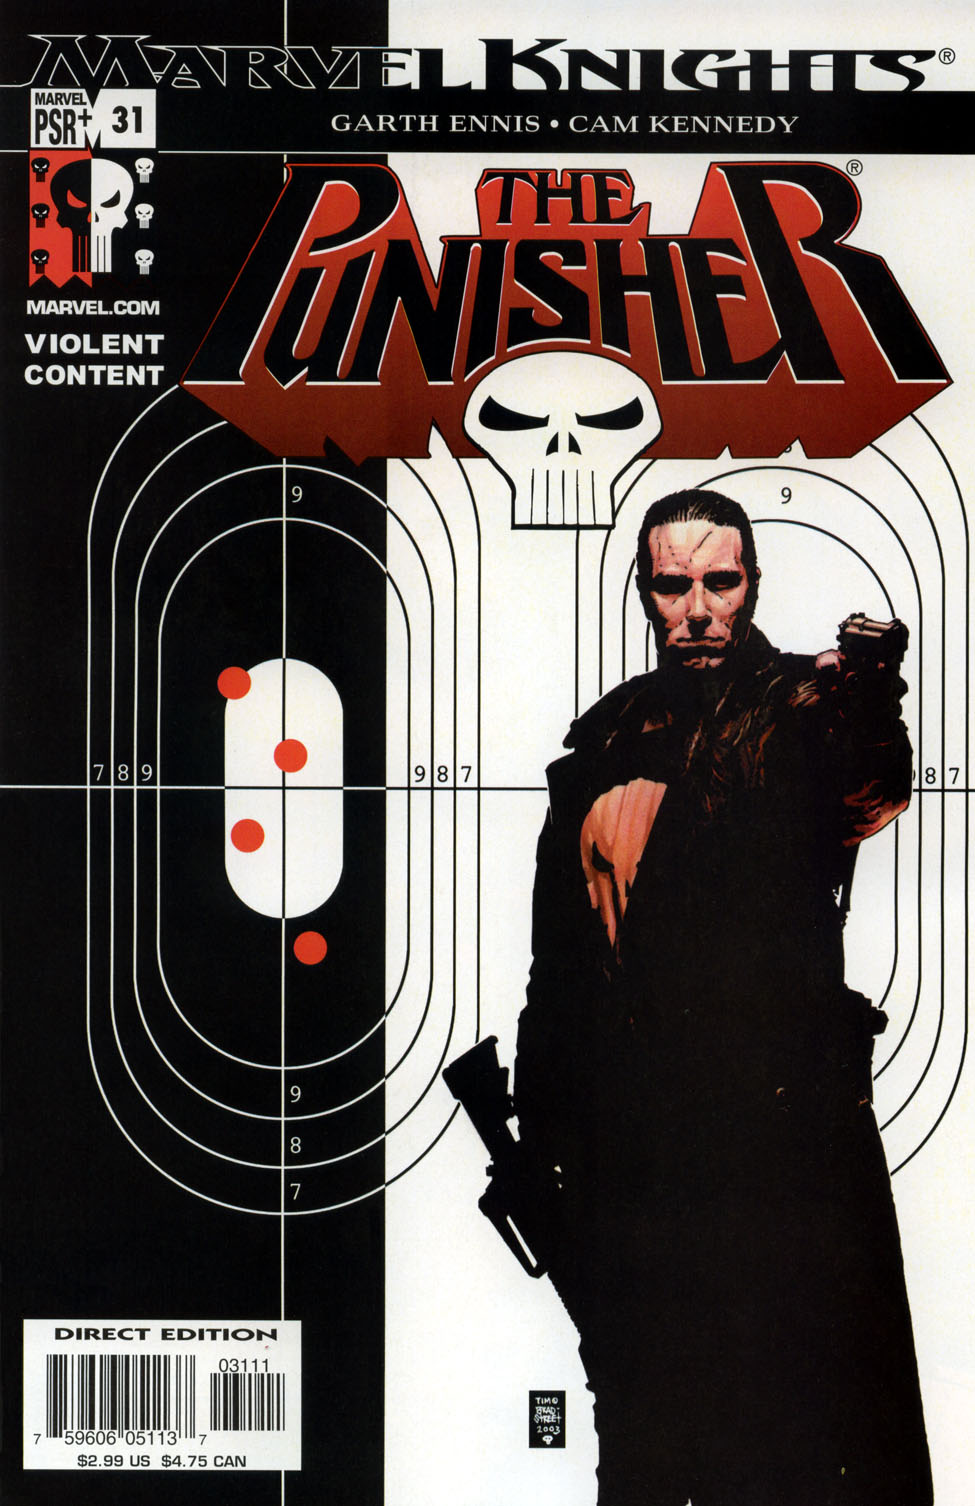 The Punisher (2001) issue 31 - Streets of Laredo #04 - Page 1